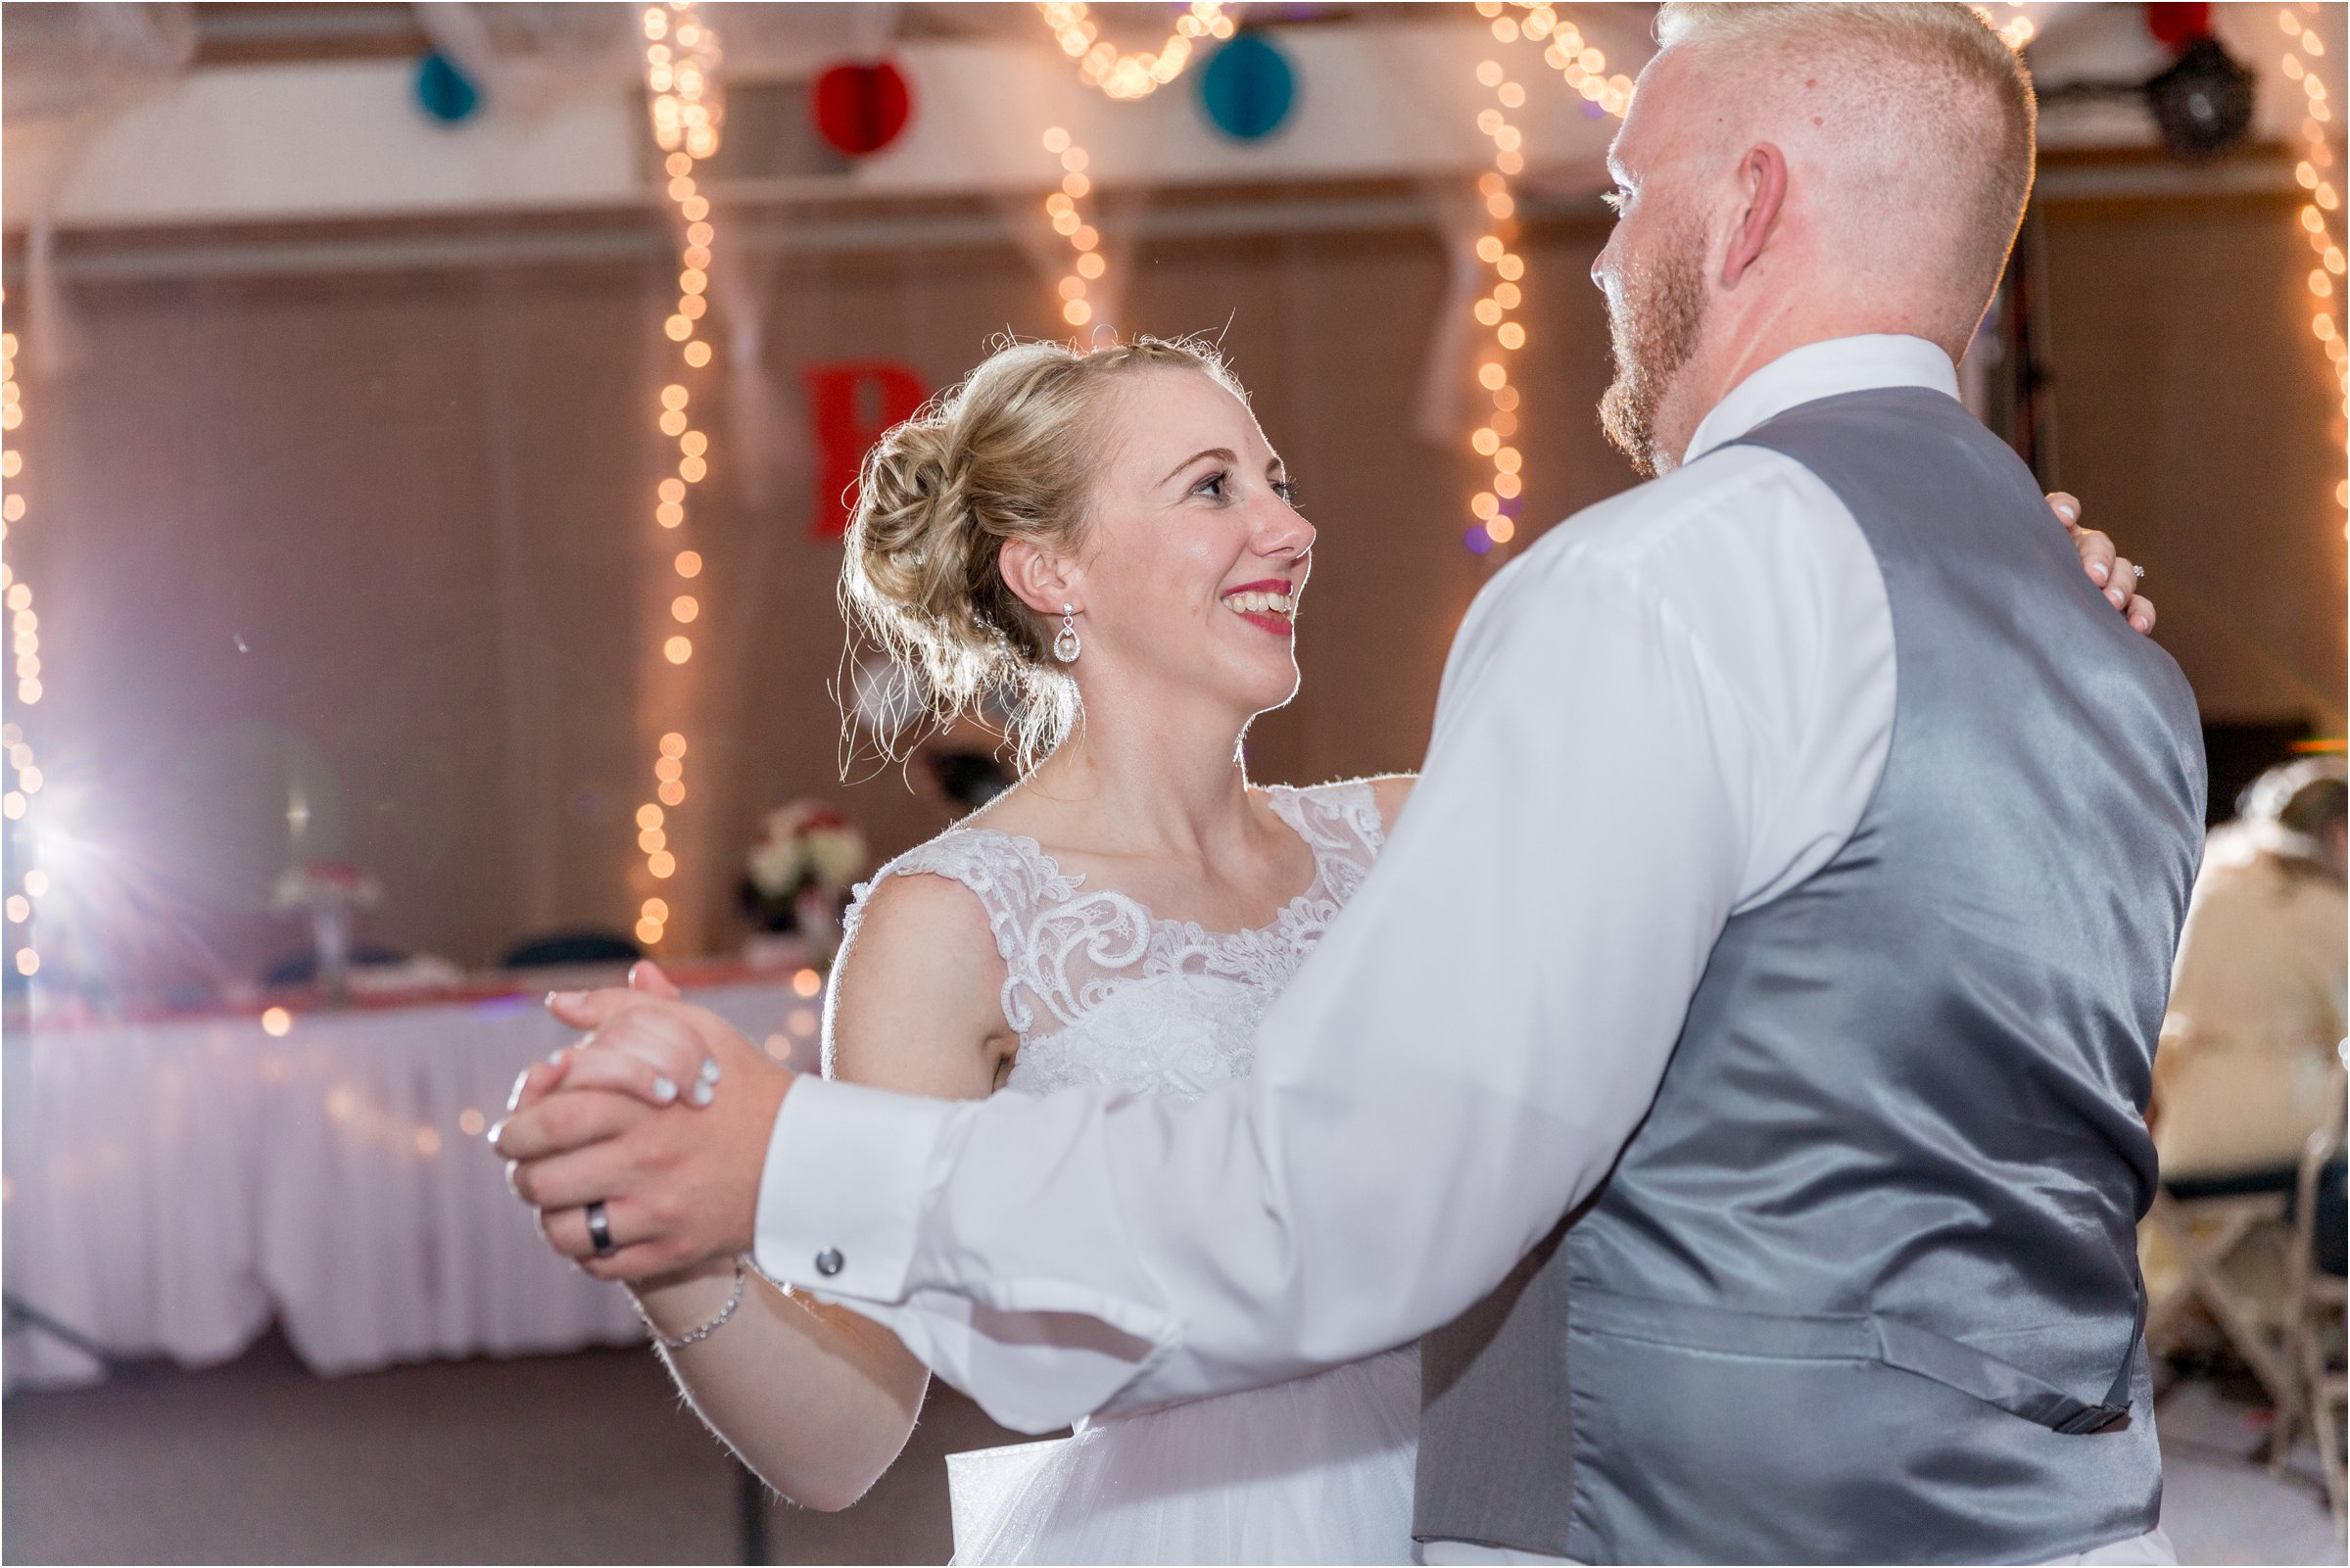 bride and groom dance together at their wedding reception in cheyenne